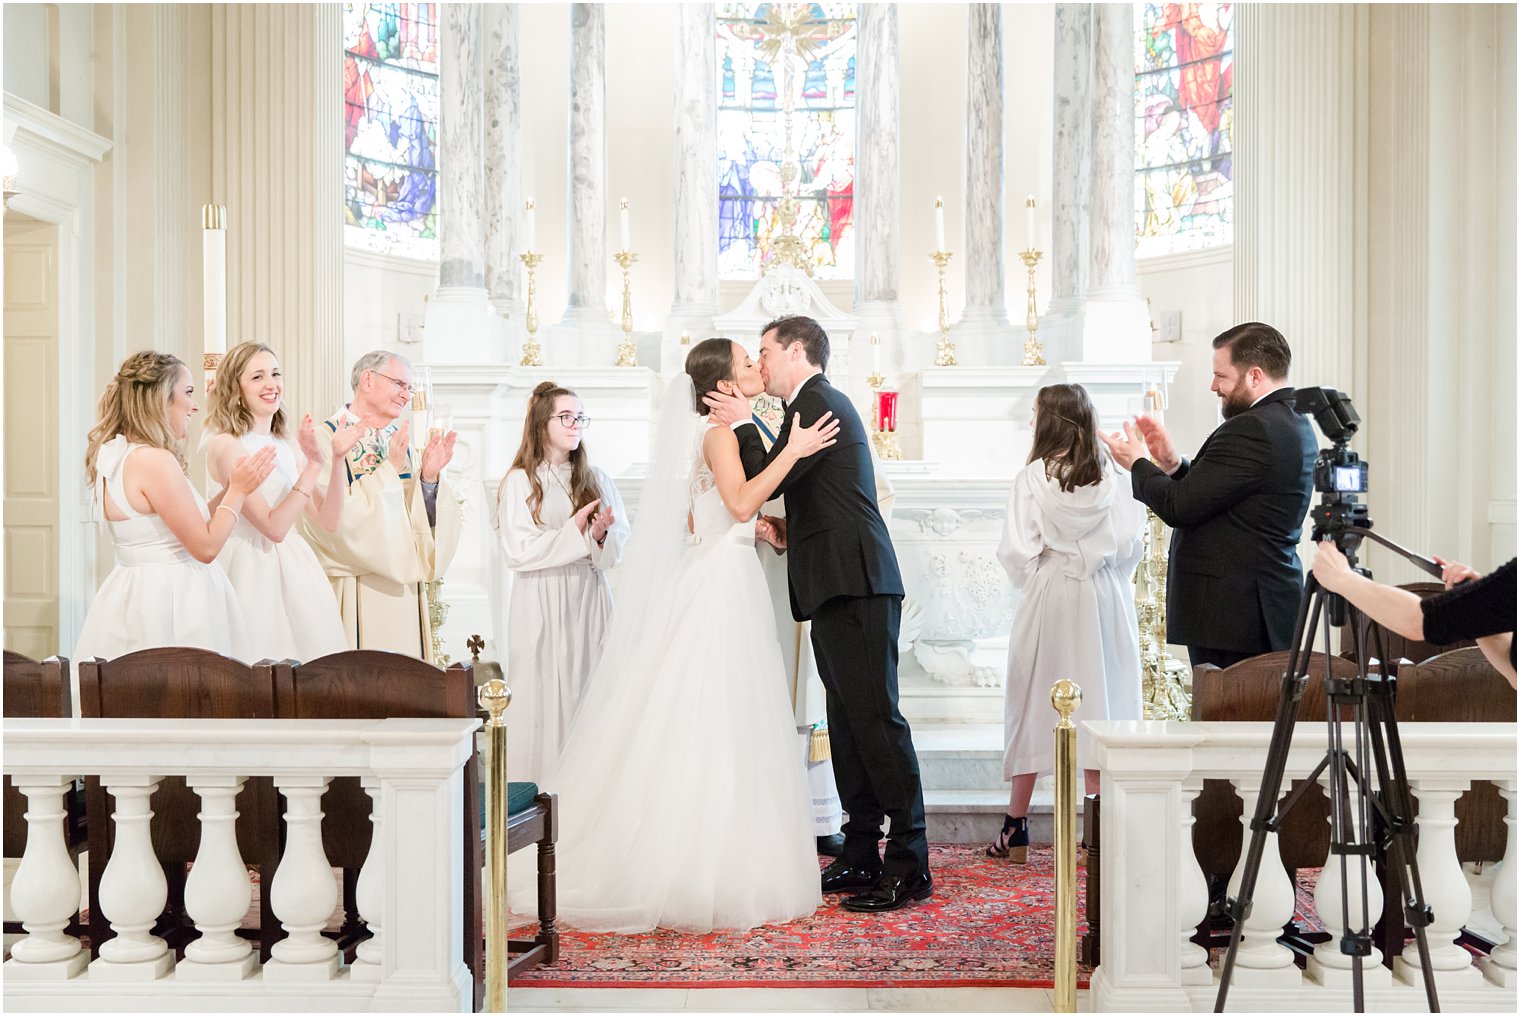 Kiss photo during wedding ceremony at St. Catharine's Church